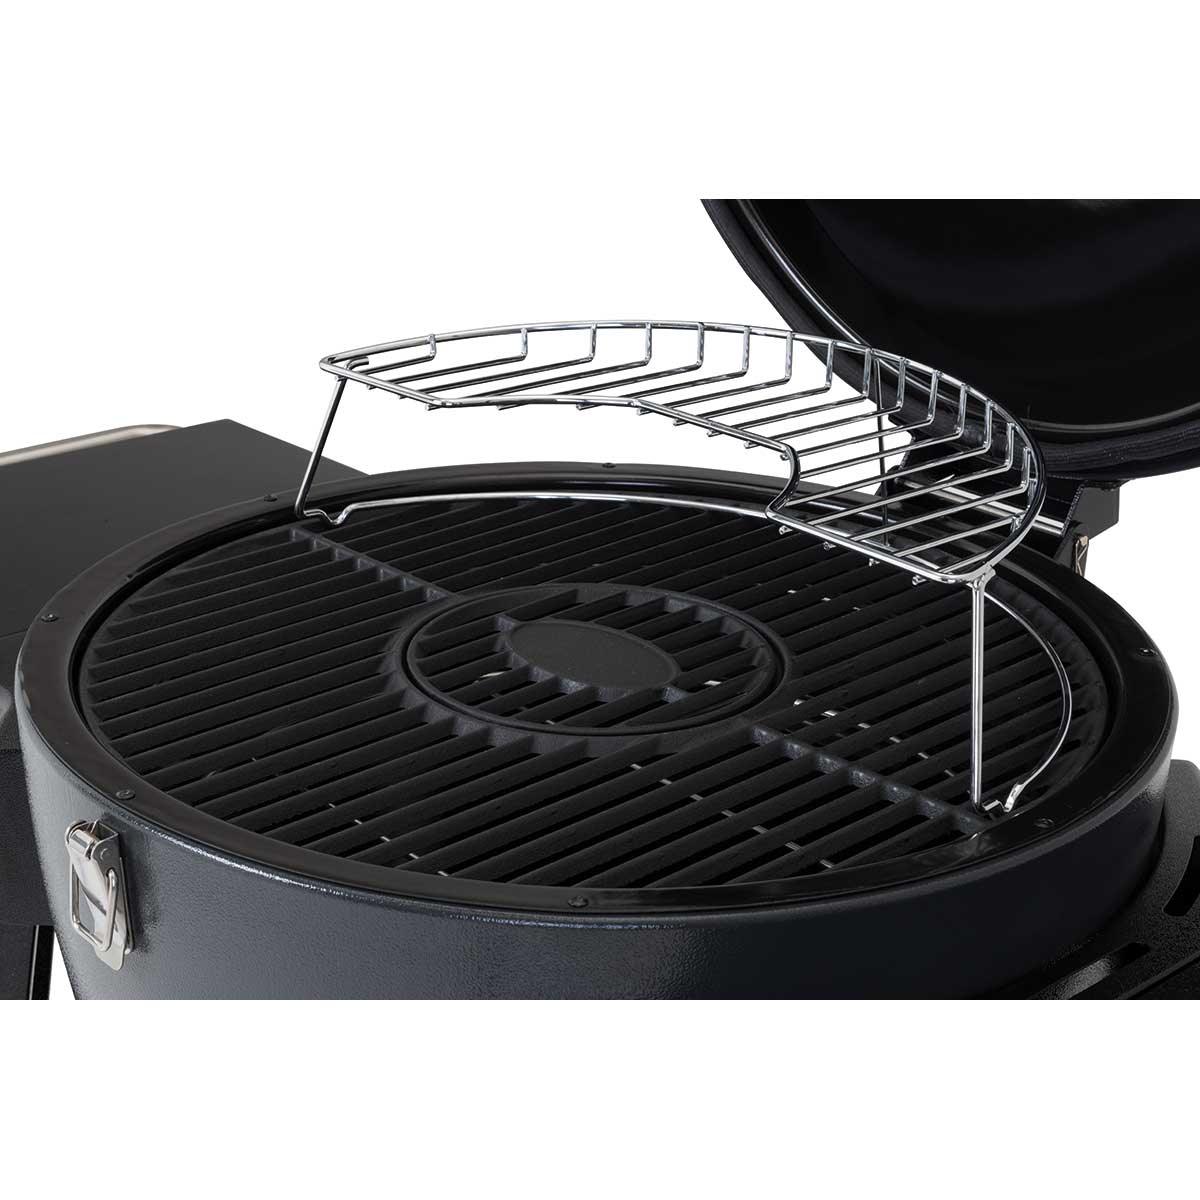 Lifestyle Dragon Egg Charcoal Barbecue - Nuovo Luxury